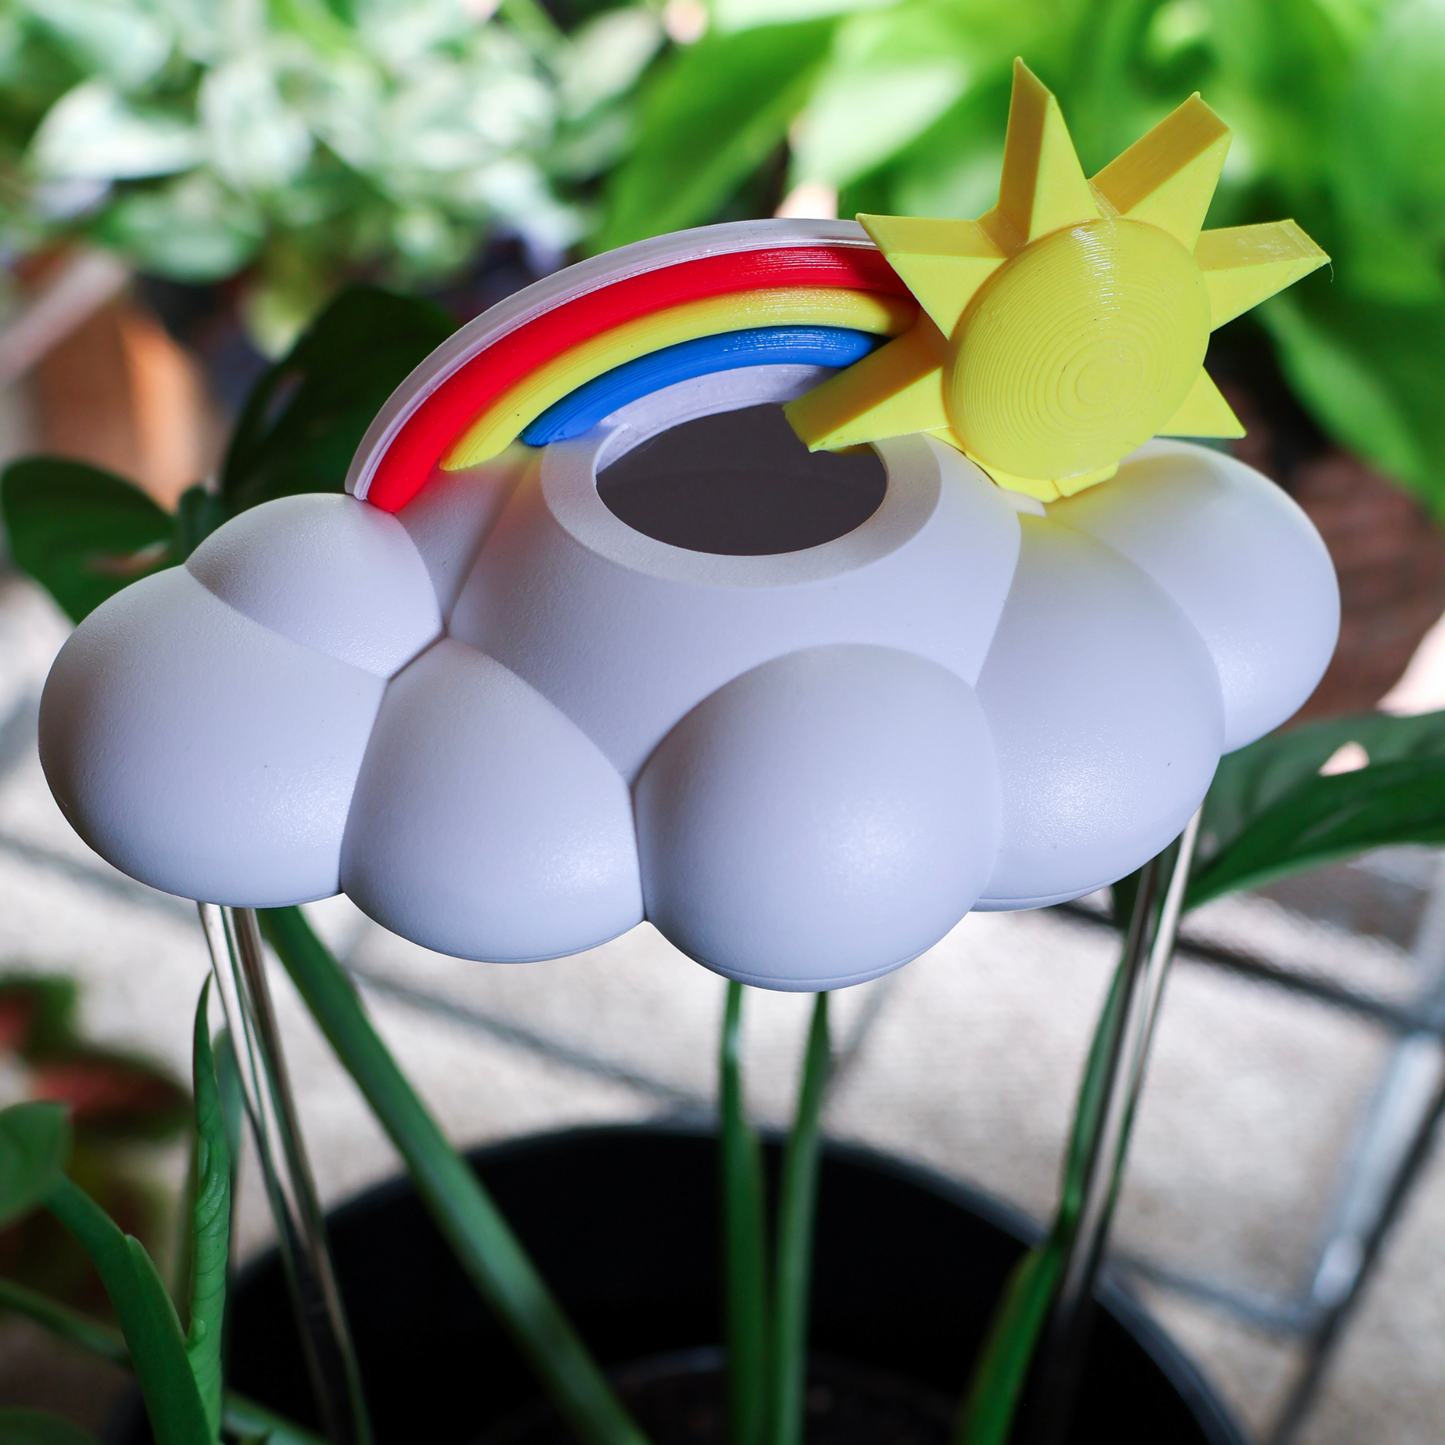 Original Dripping rain cloud by THE CLOUD MAKERS with rainbow and sun charms